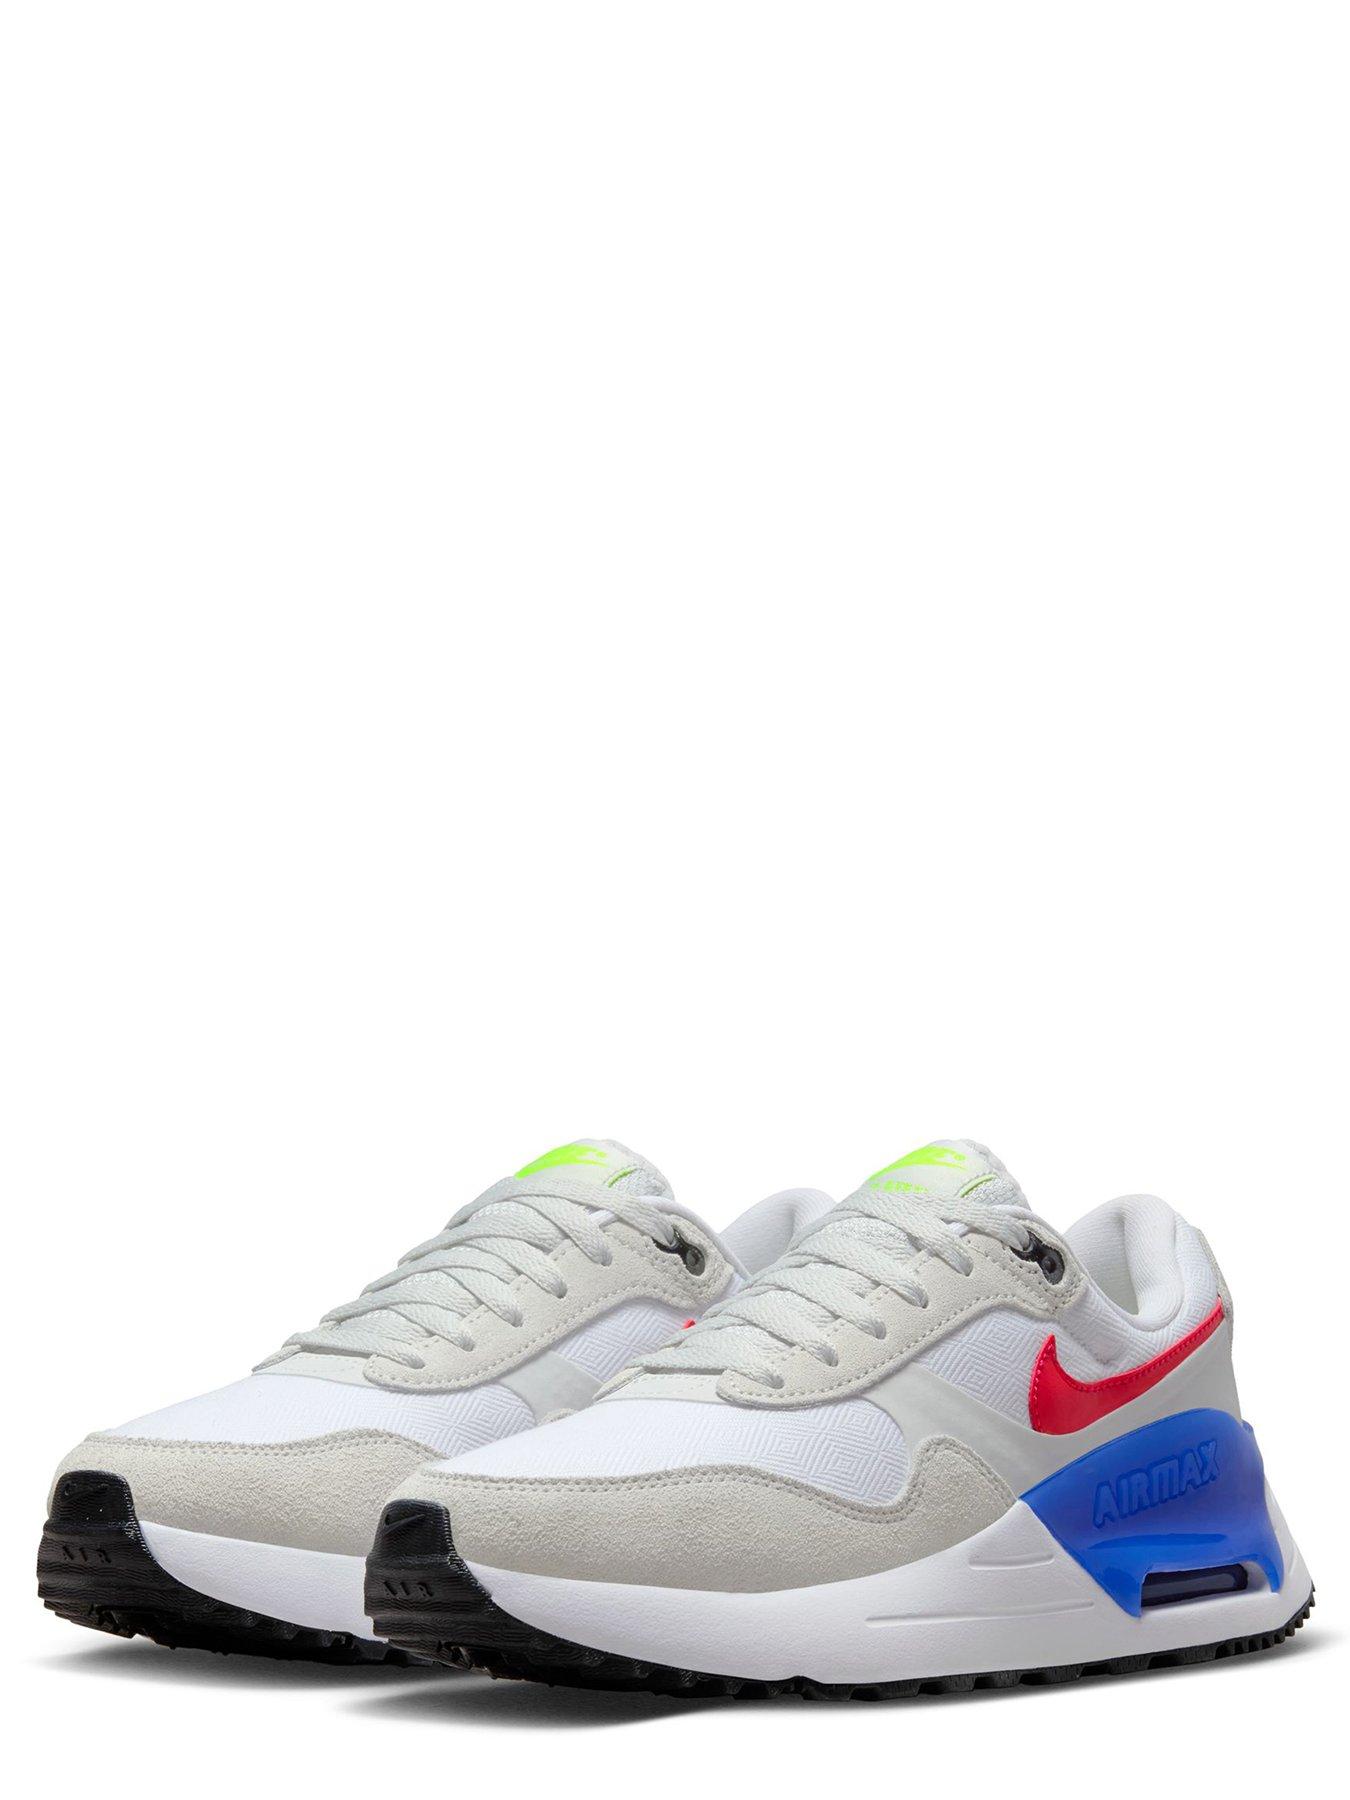 Nike Air Max SYSTM Trainers - White/Red | very.co.uk